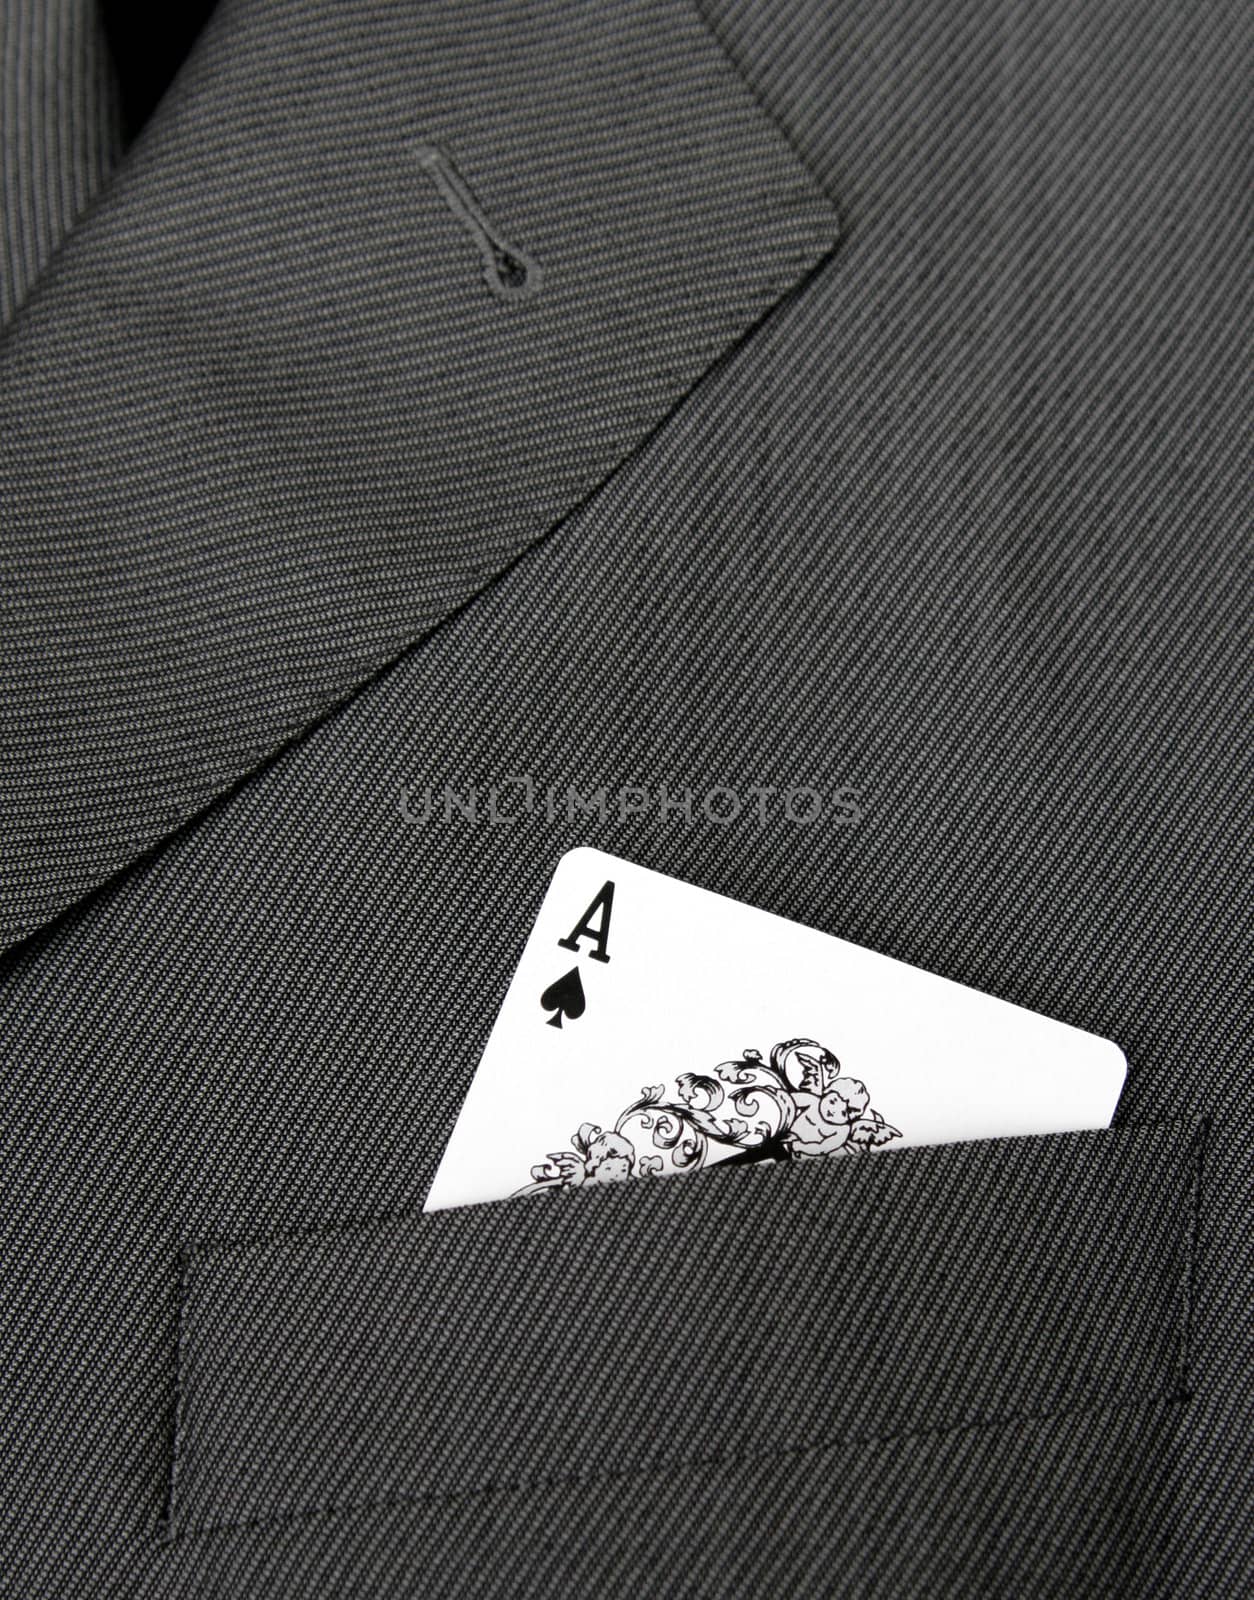 Card Suit by thorsten